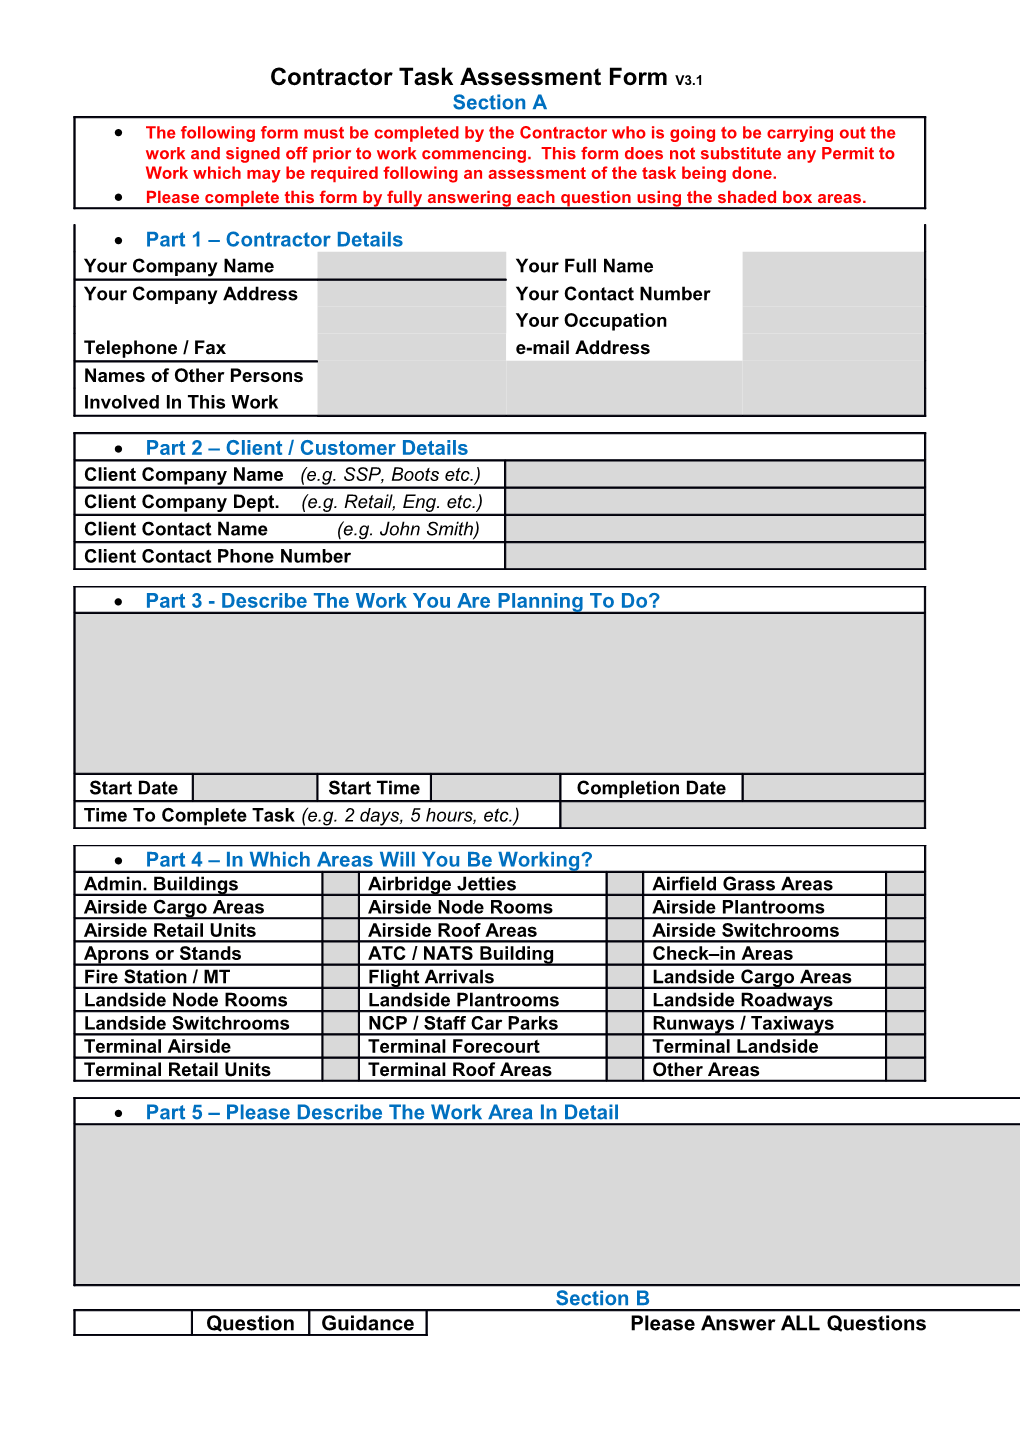 Contractor Task Assessment Form